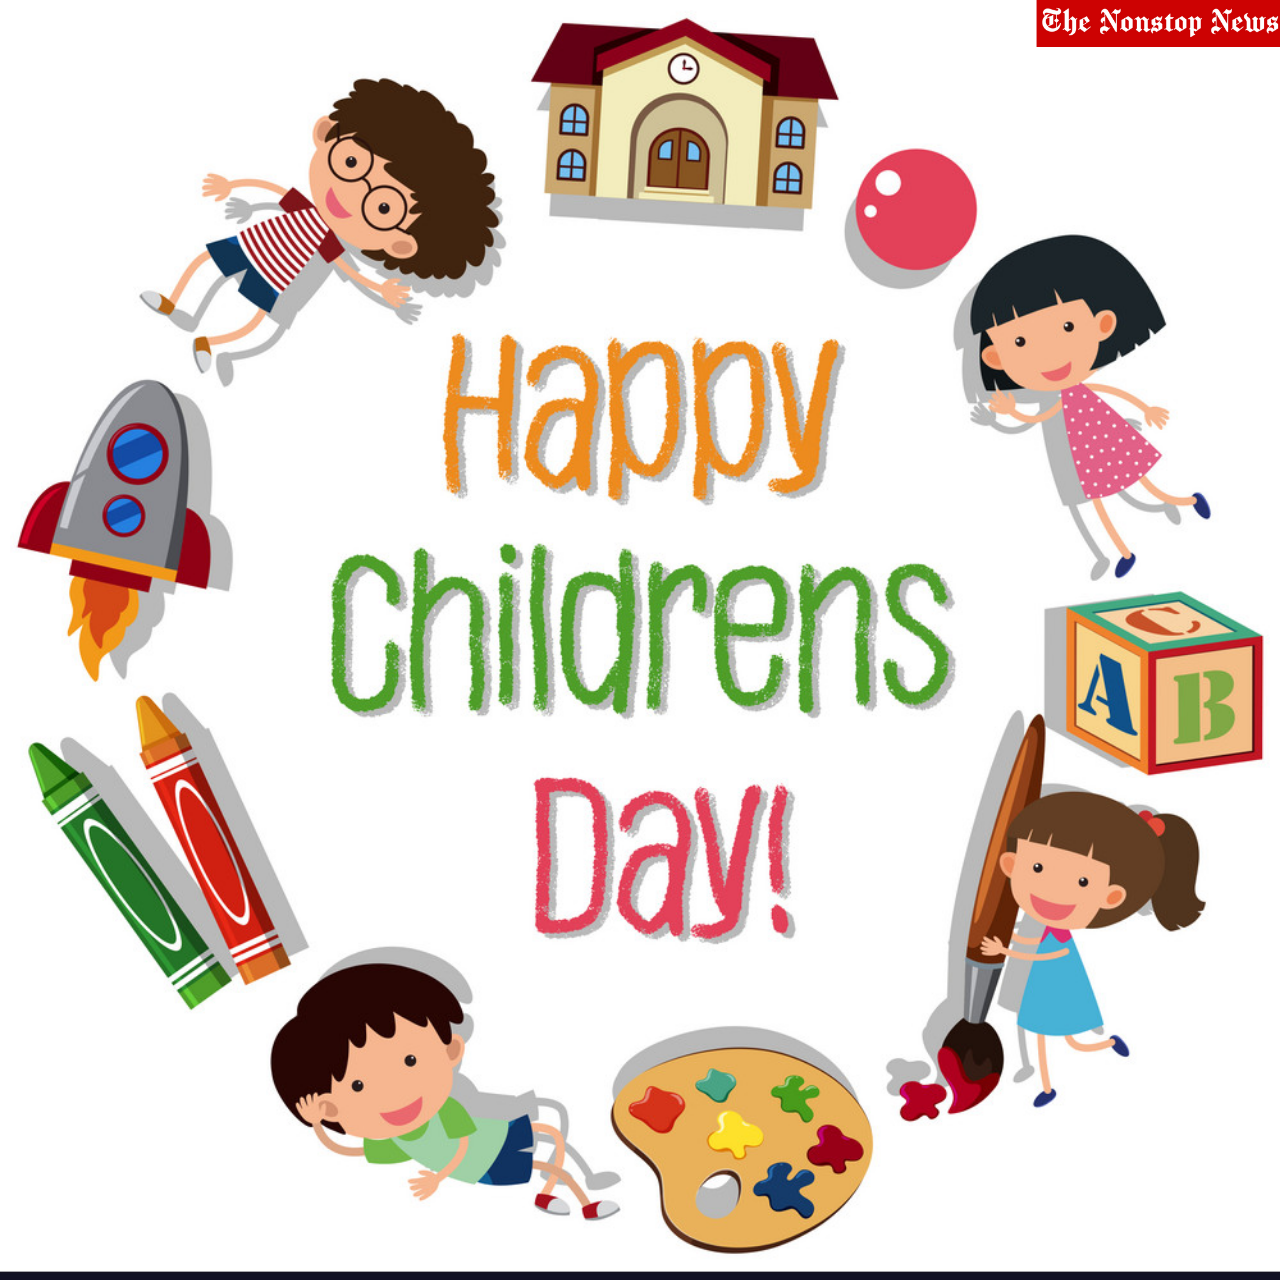 Happy Children's Day 2021 Quotes, Wishes, HD Images, Greetings, and Messages